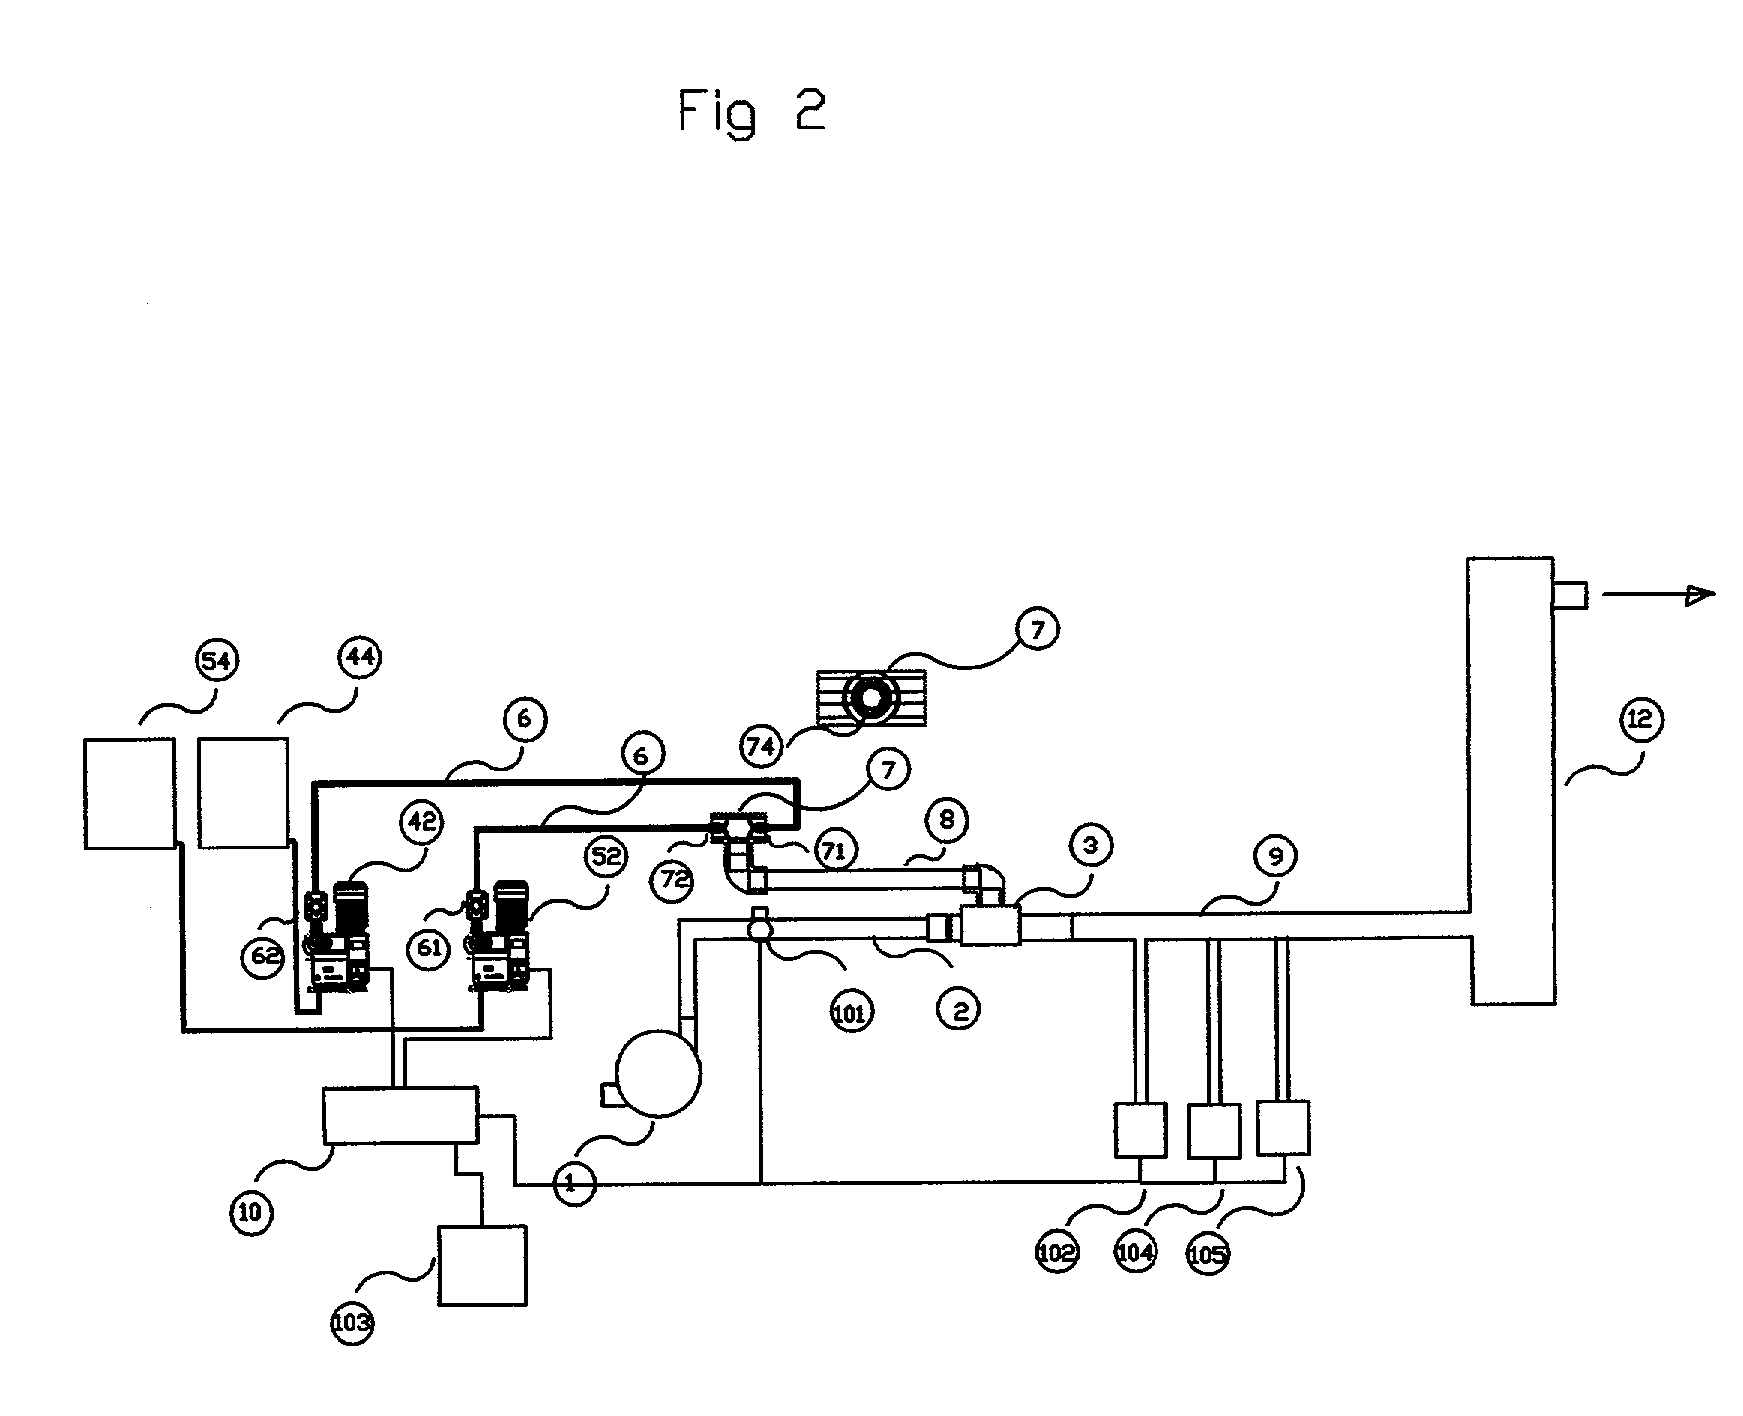 Process and apparatus for the generation of chlorine dioxide using a replenished foam system